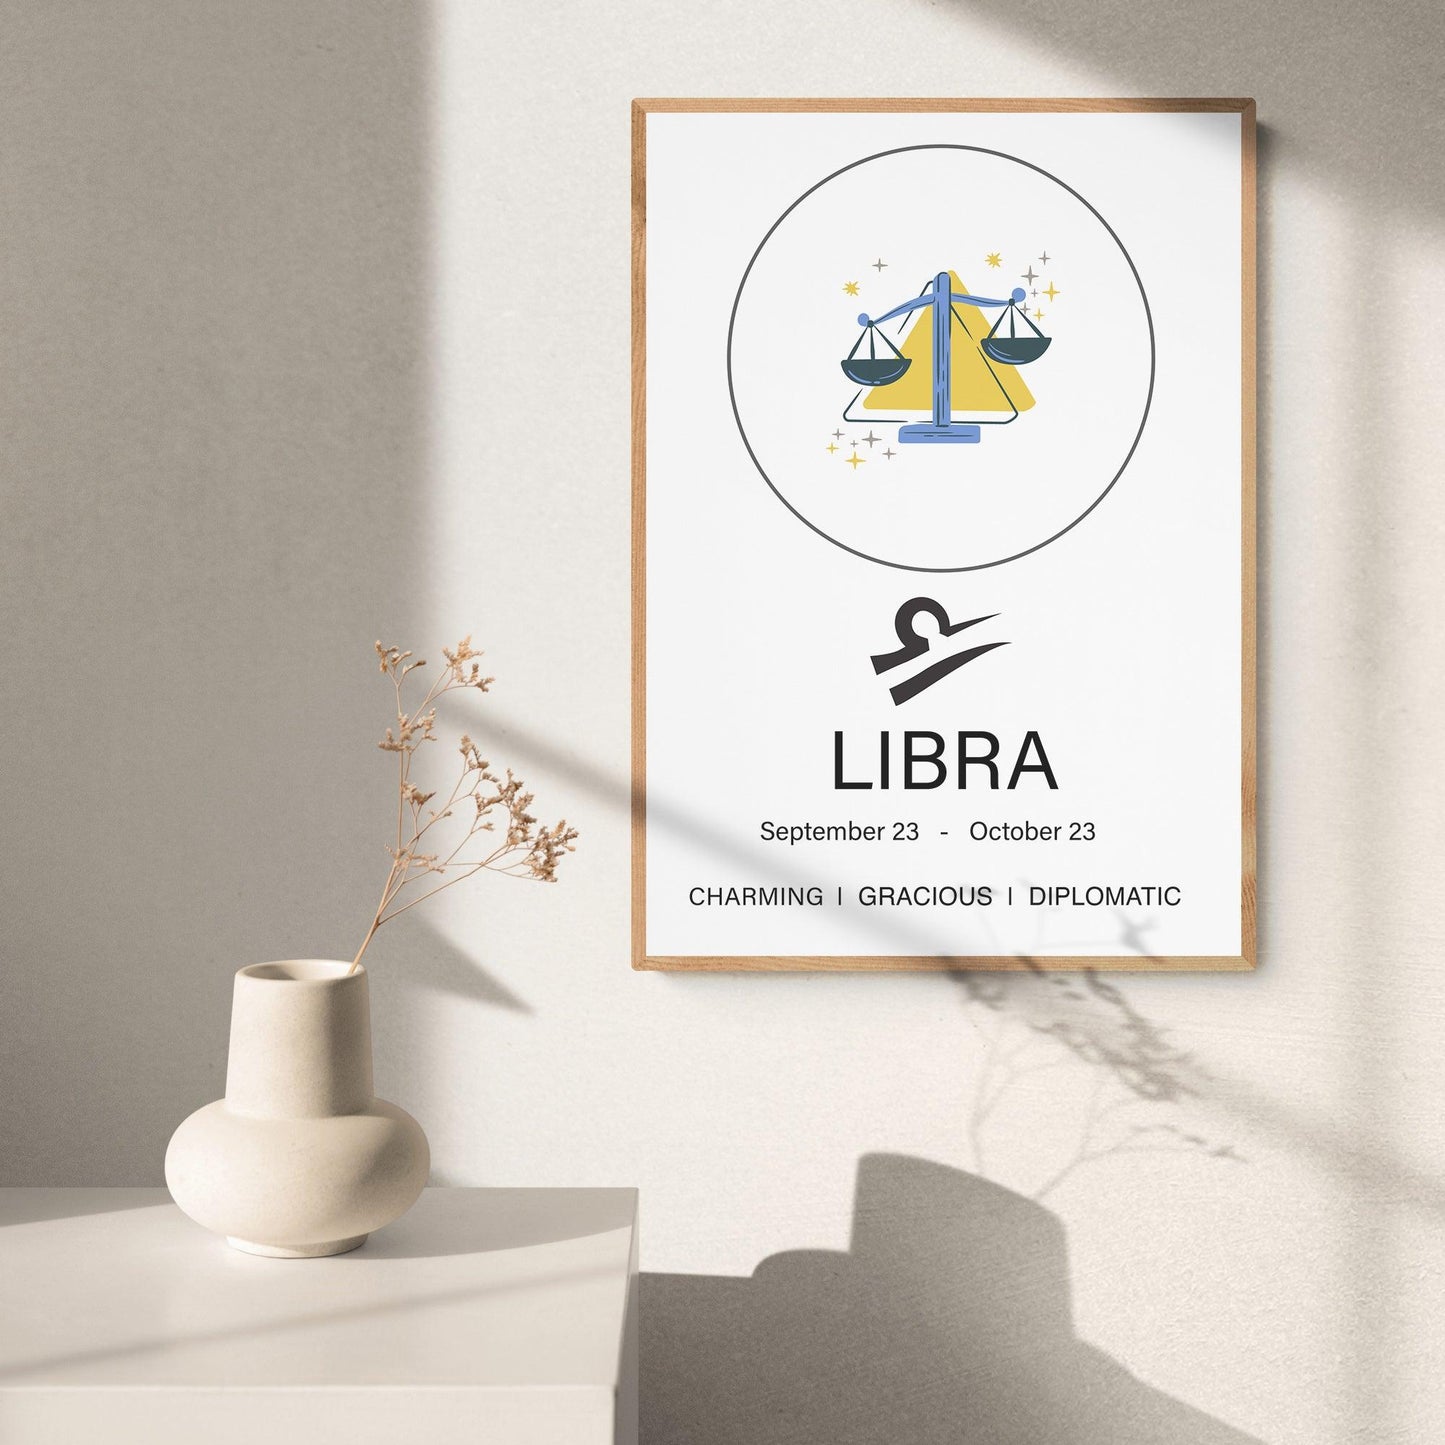 ✴ NEW ARRIVAL ✴  Zodiac Signs Definition Prints ✴    Our zodiac sign prints come in trendy and alike designs, you can create a small gallery wall with prints for the whole family!  With what sign do you feel better? 